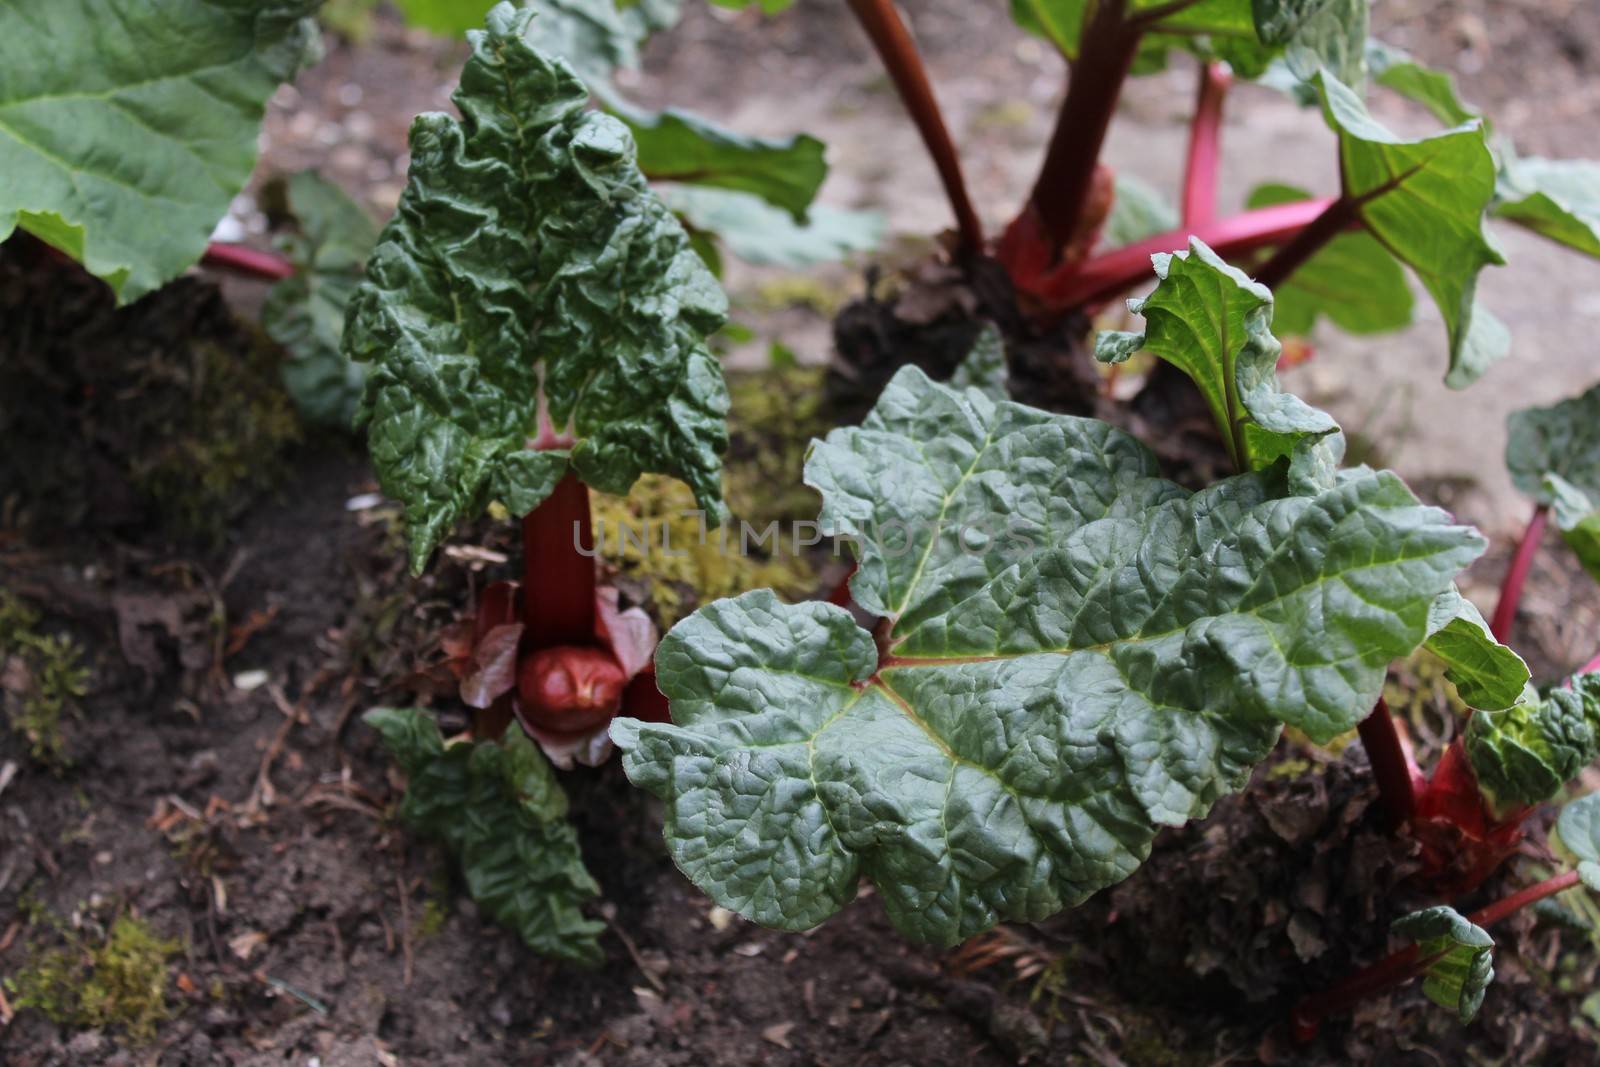 The picture shows rhubarb in the ground